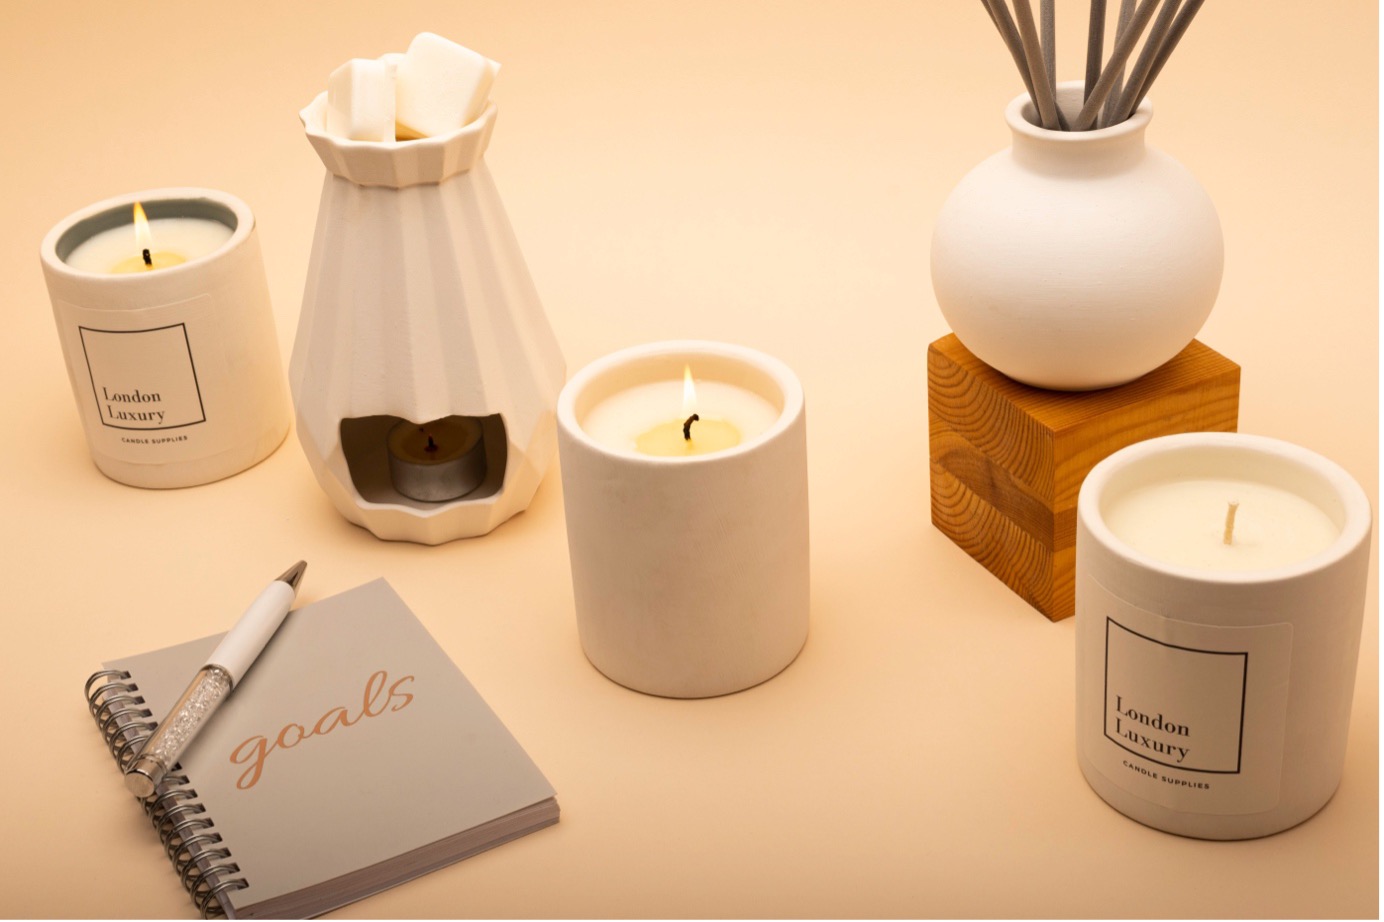 Ceramic candle range with a book that reads 'Goals' on the cover.